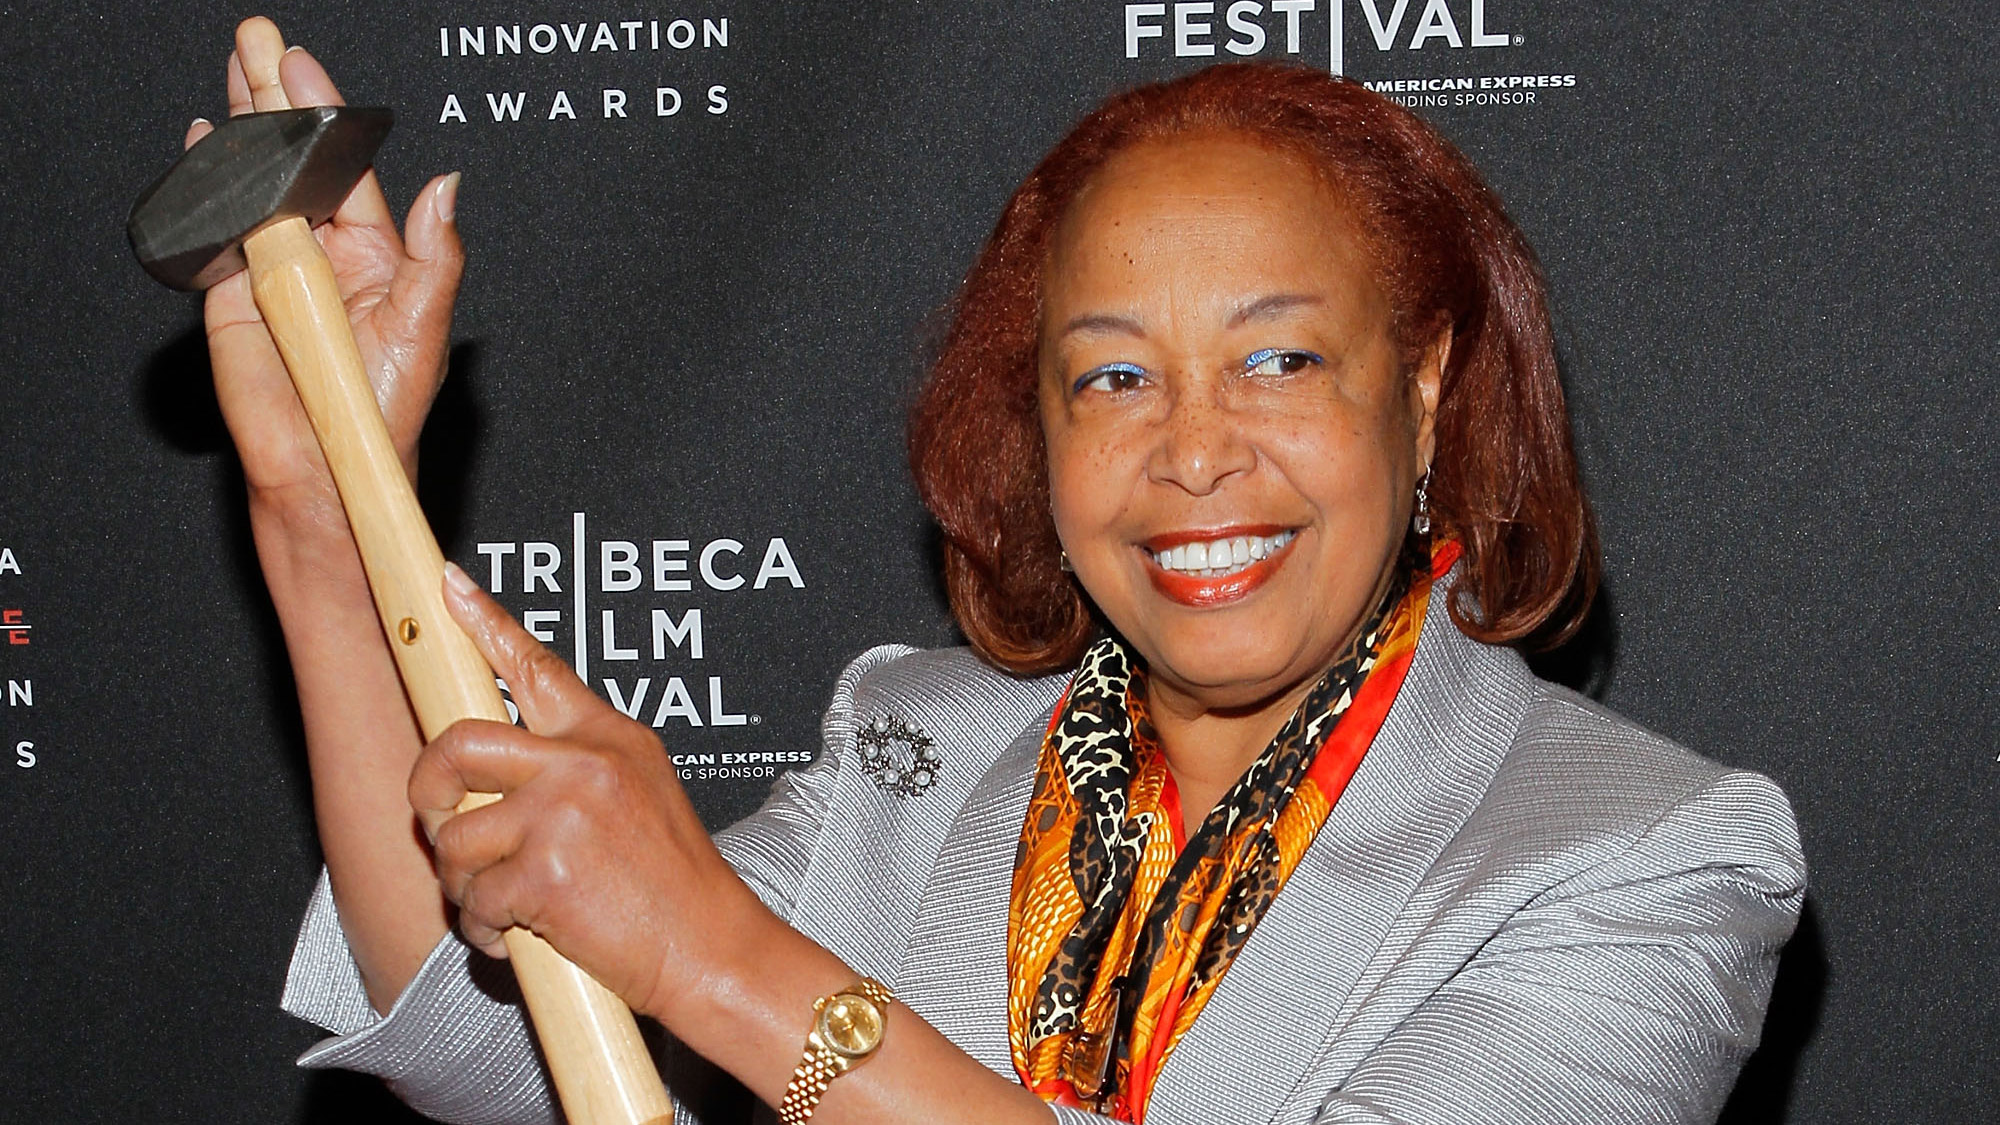 Patricia Bath, ophthalmologist and inventor of the laserphaco system